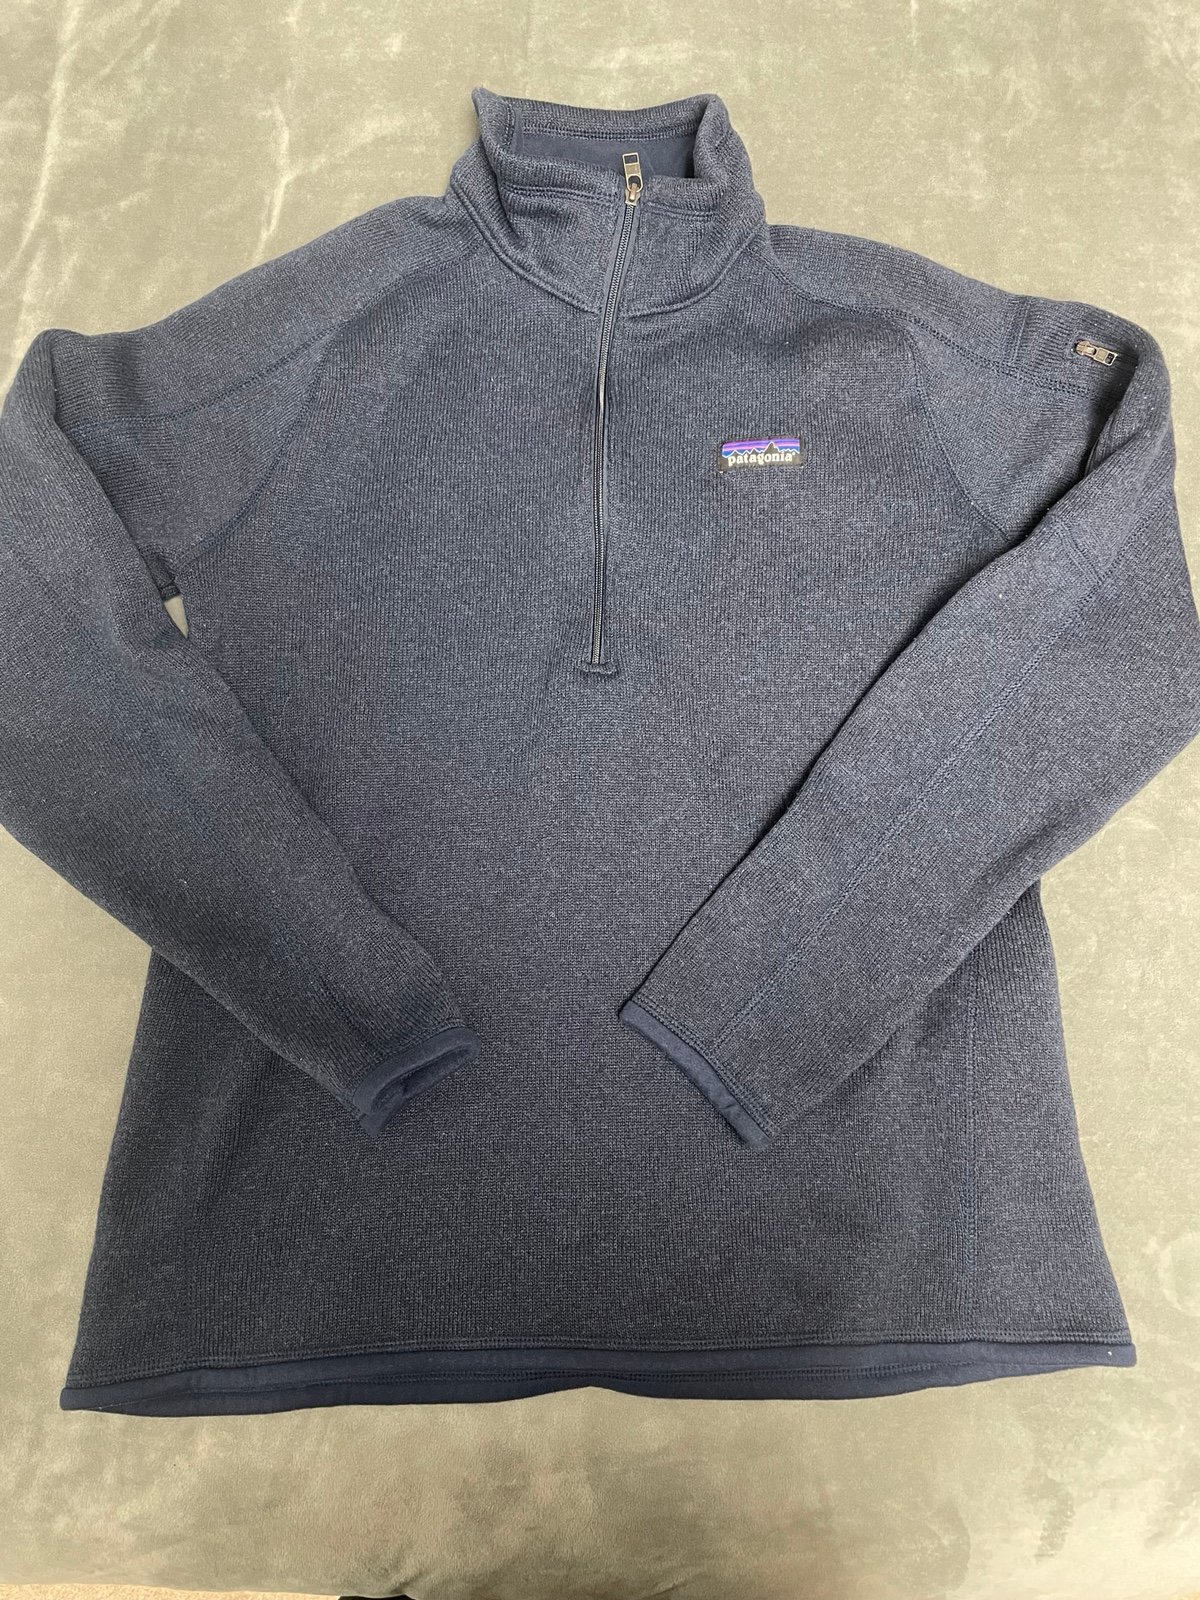 good price Patagonia better sweater pullover mrbQqszOE for sale